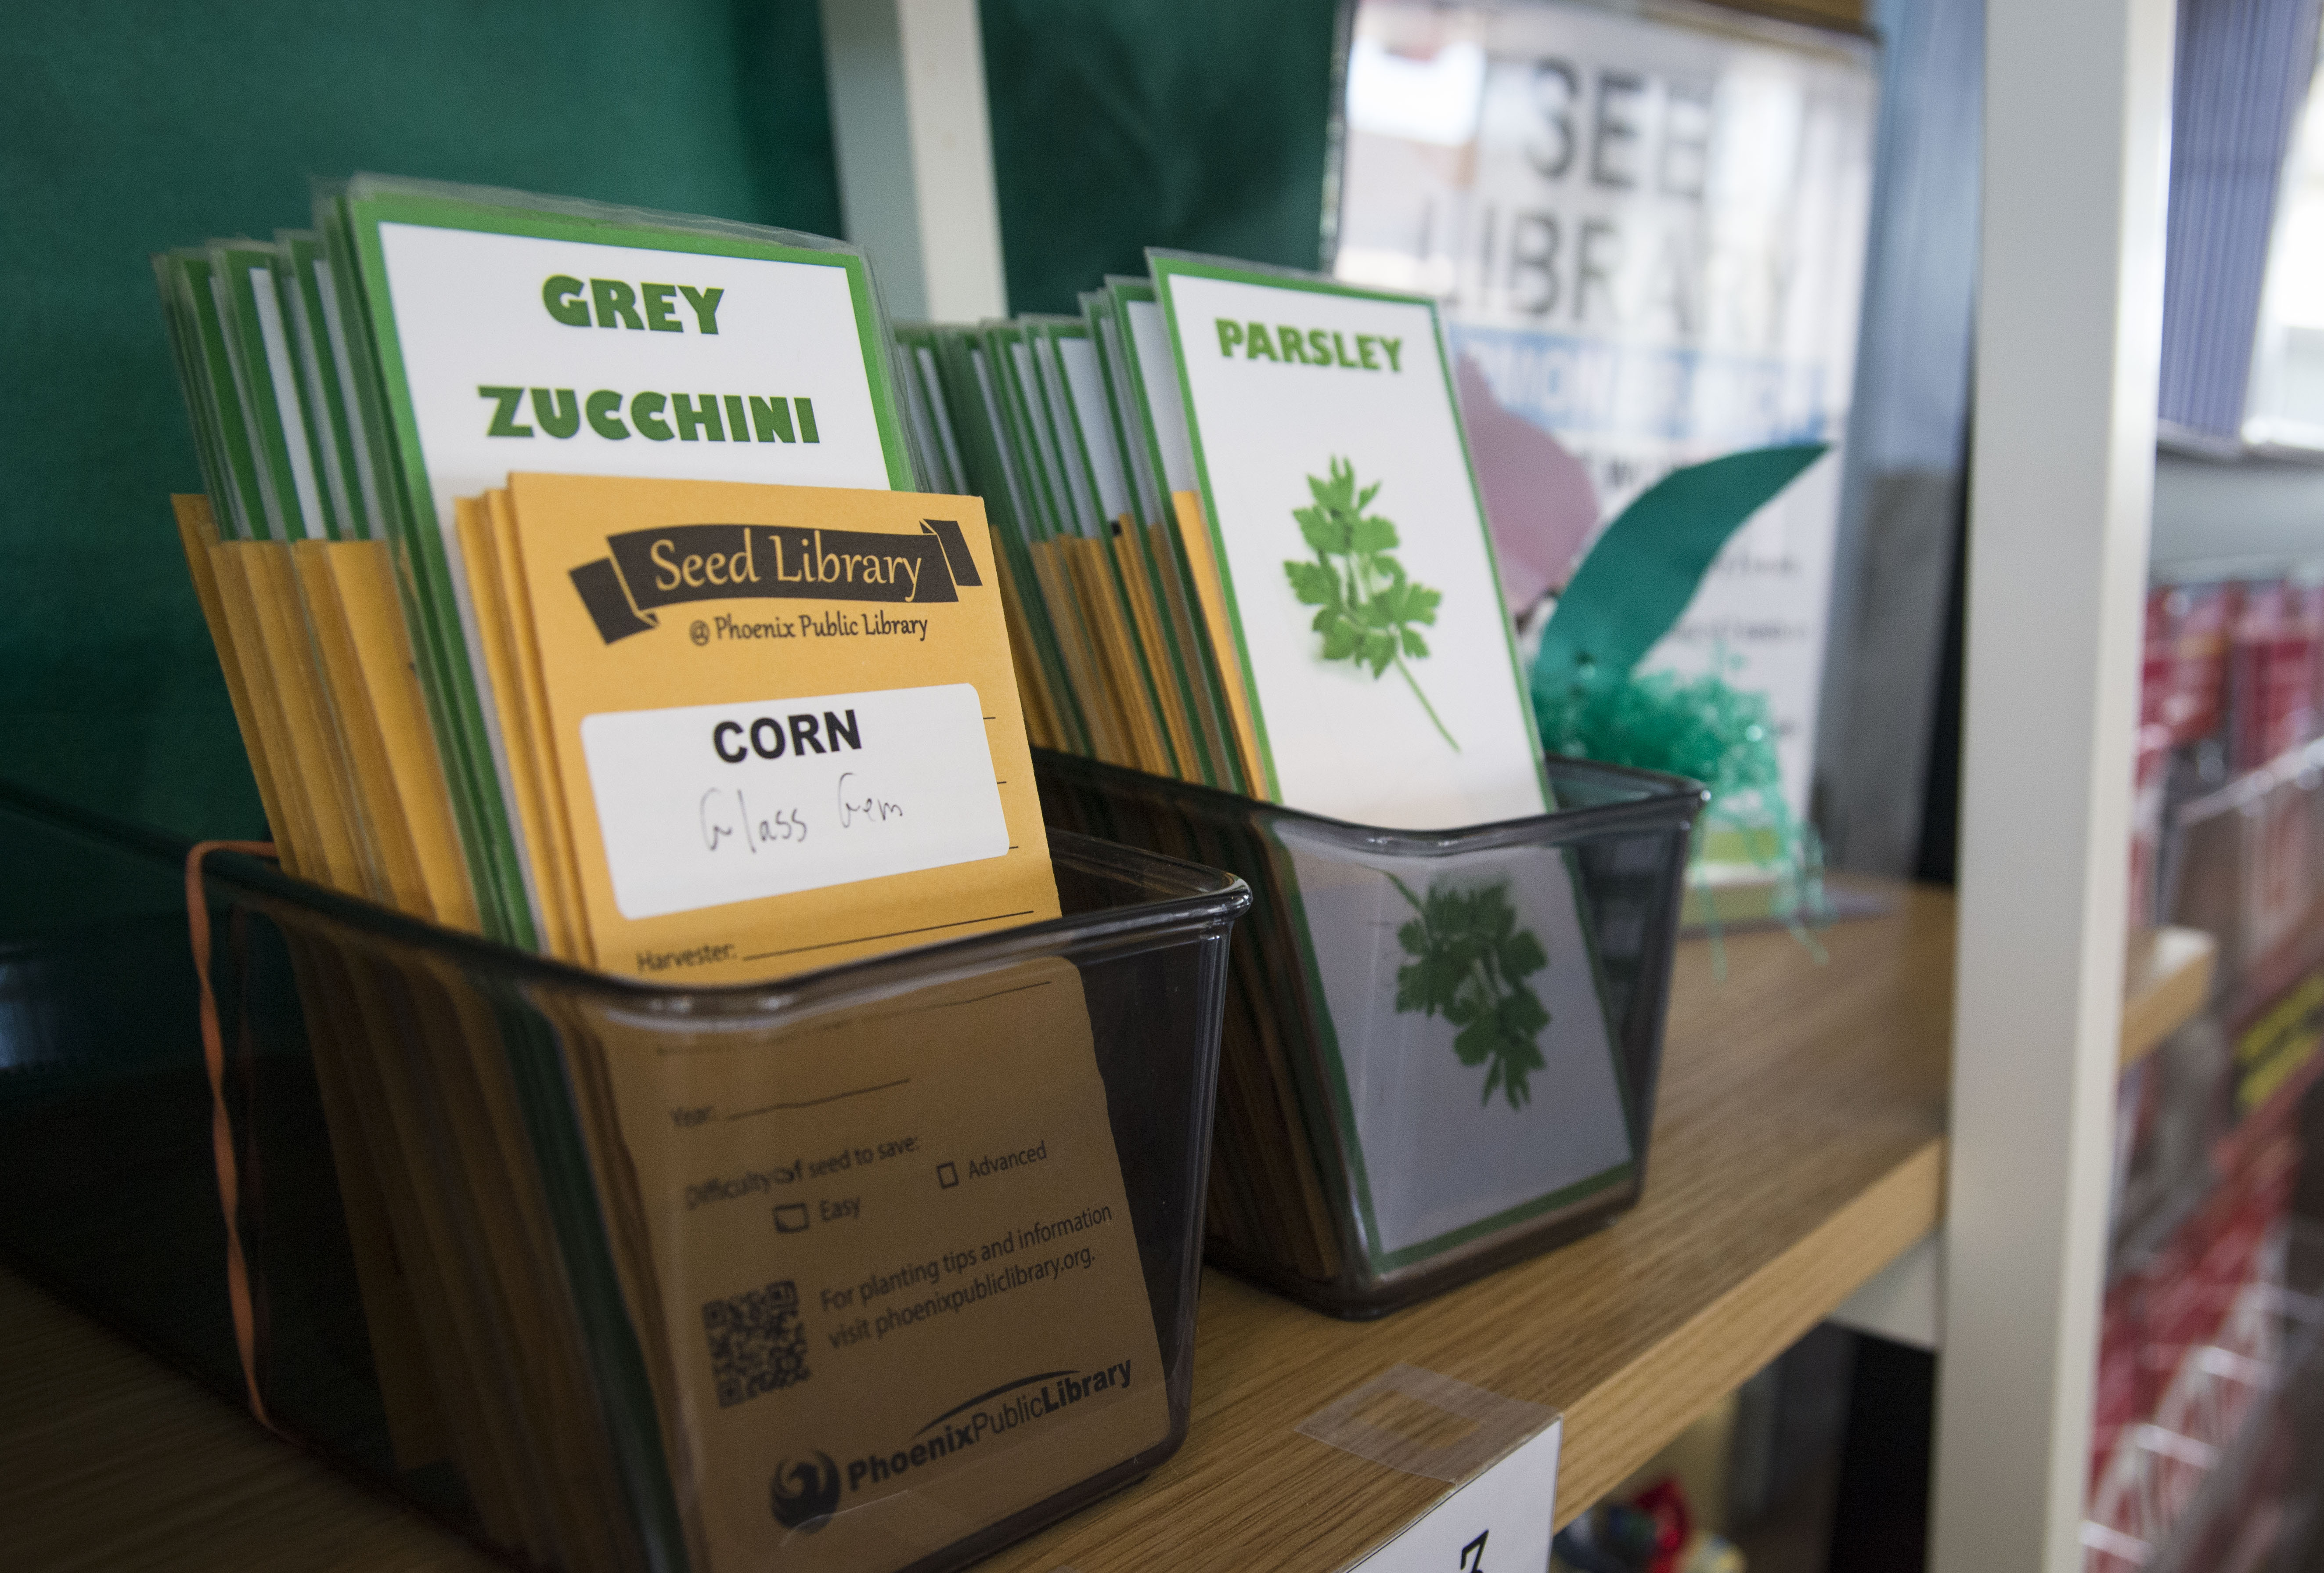 ATLAS OBSCURA: Why So Many Public Libraries Are Now Giving Out Seeds